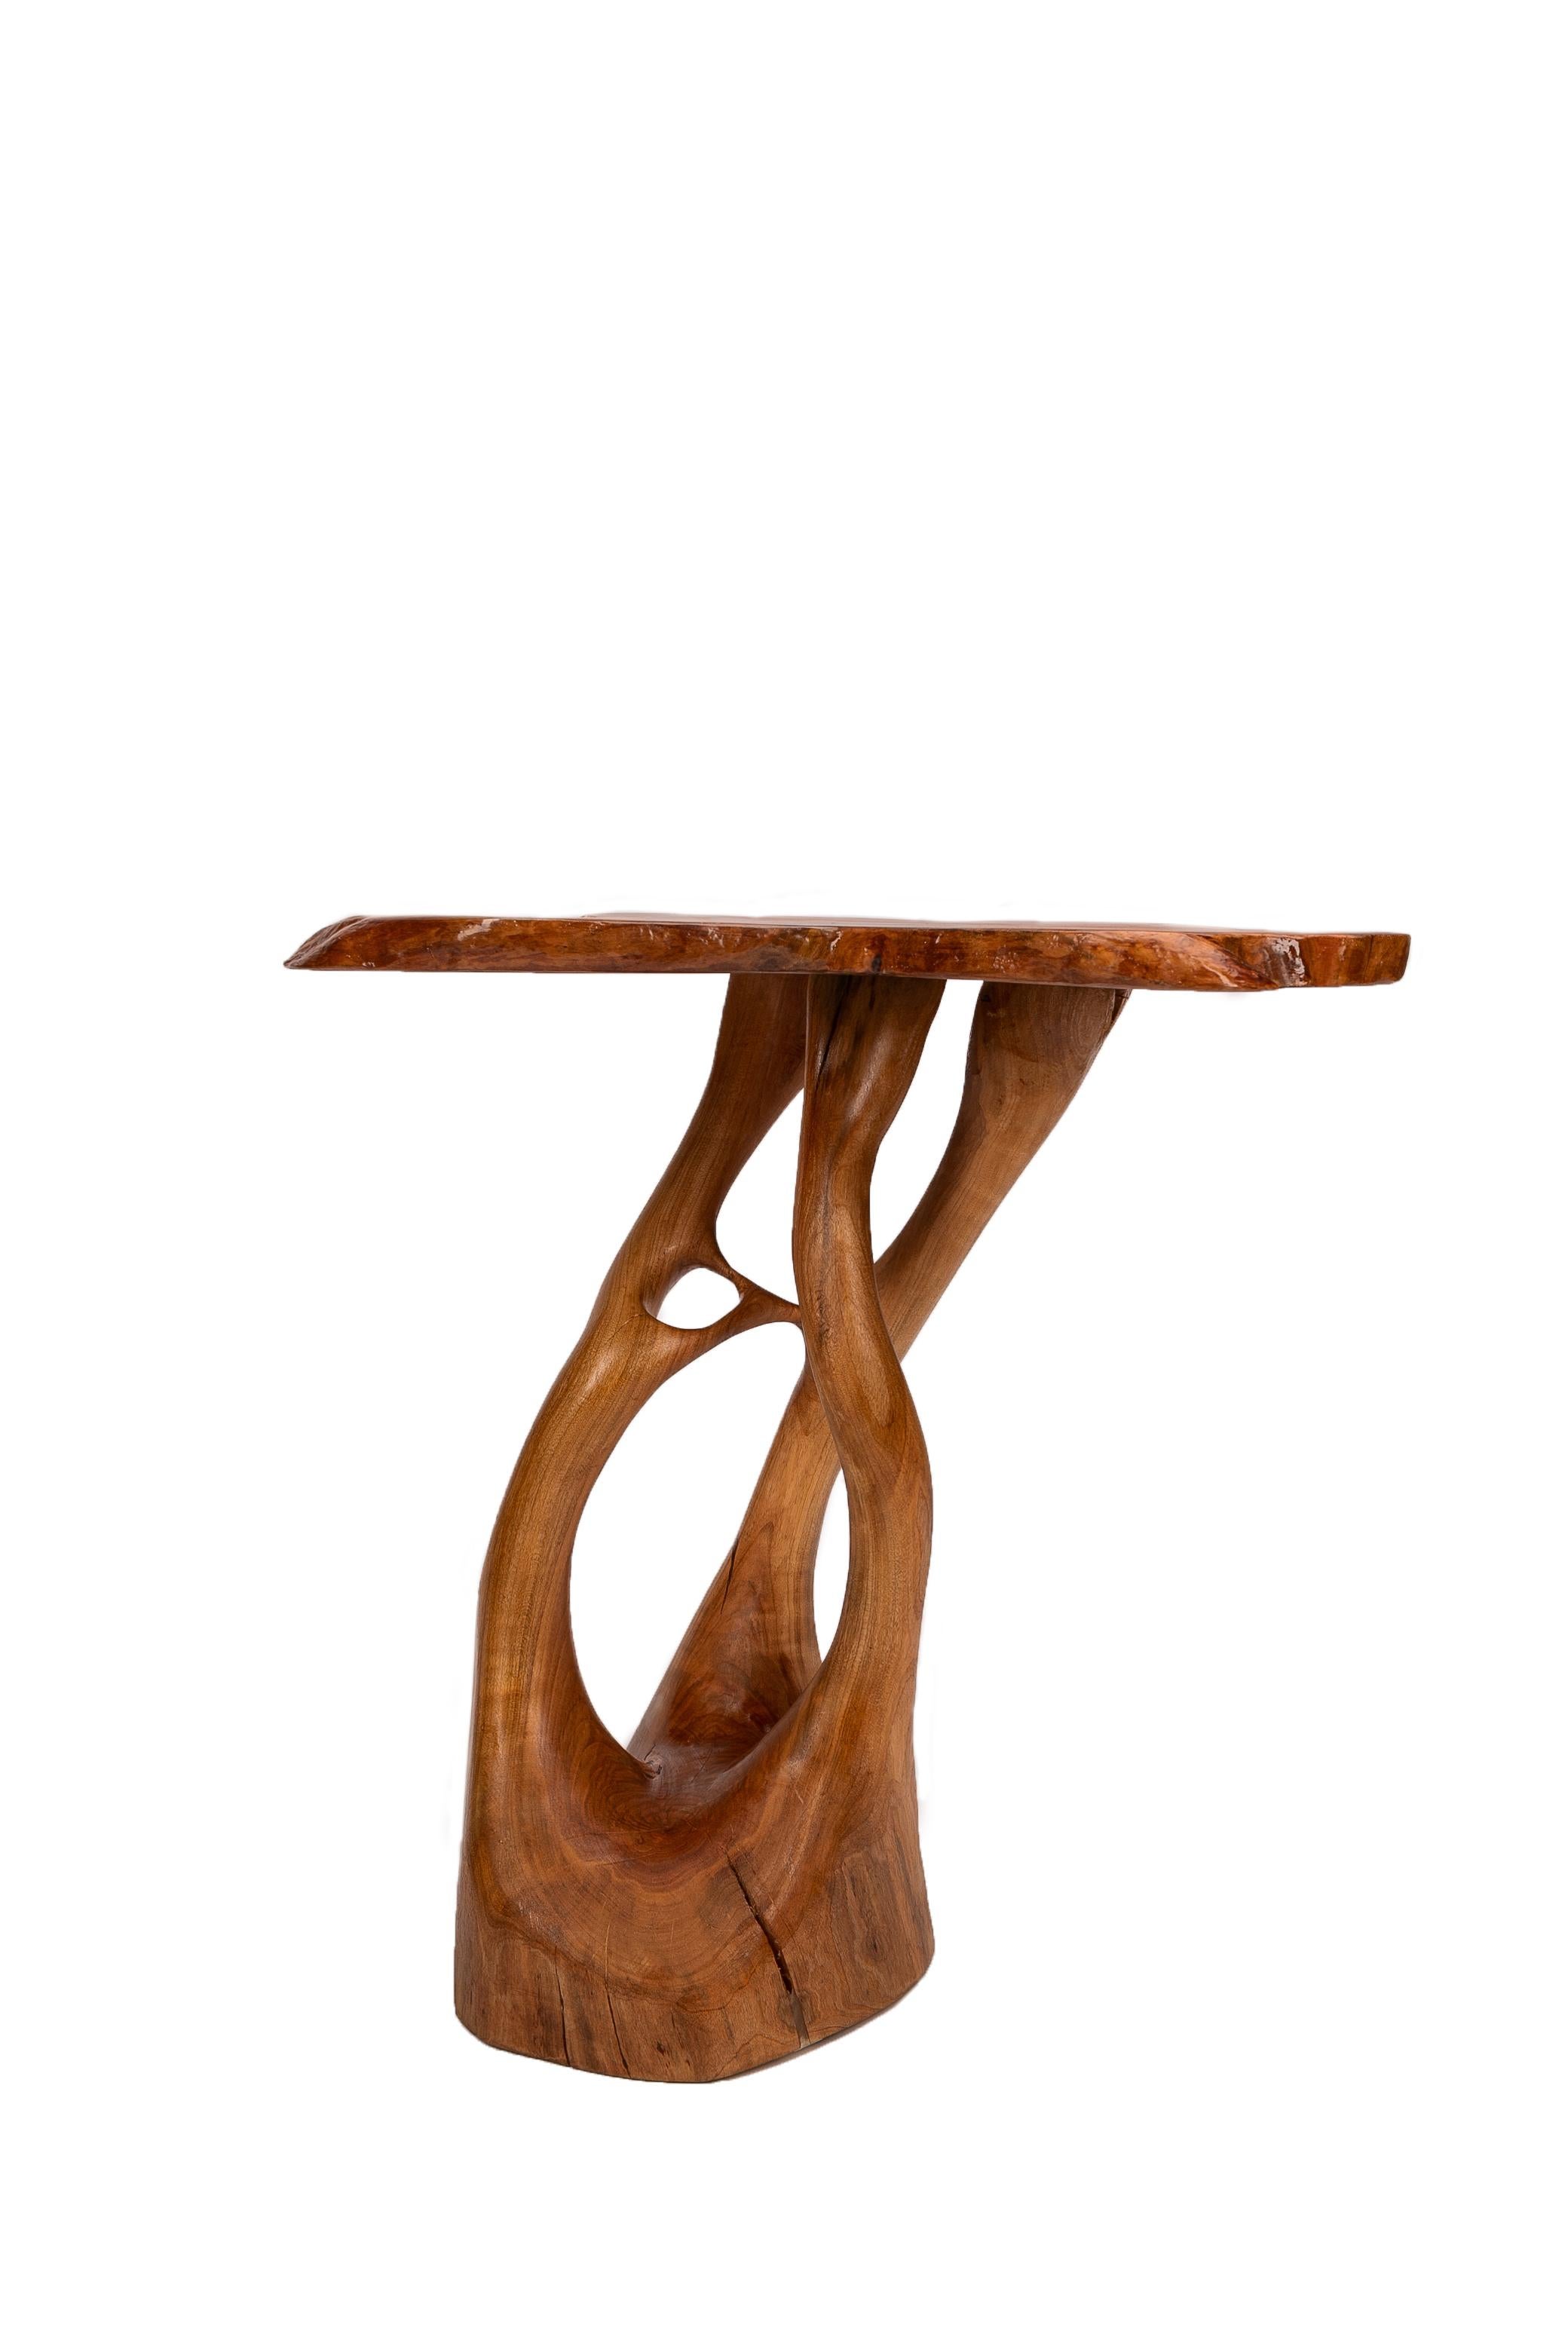 Gueridon papillon cherry table by Biome Design
One of a Kind
Dimensions: D 45 x H 50 cm
Materials: 50 year old cherry wood, biobased resin

This table takes you to the tropical forest biome discovering lush vegetation and wild animals. This